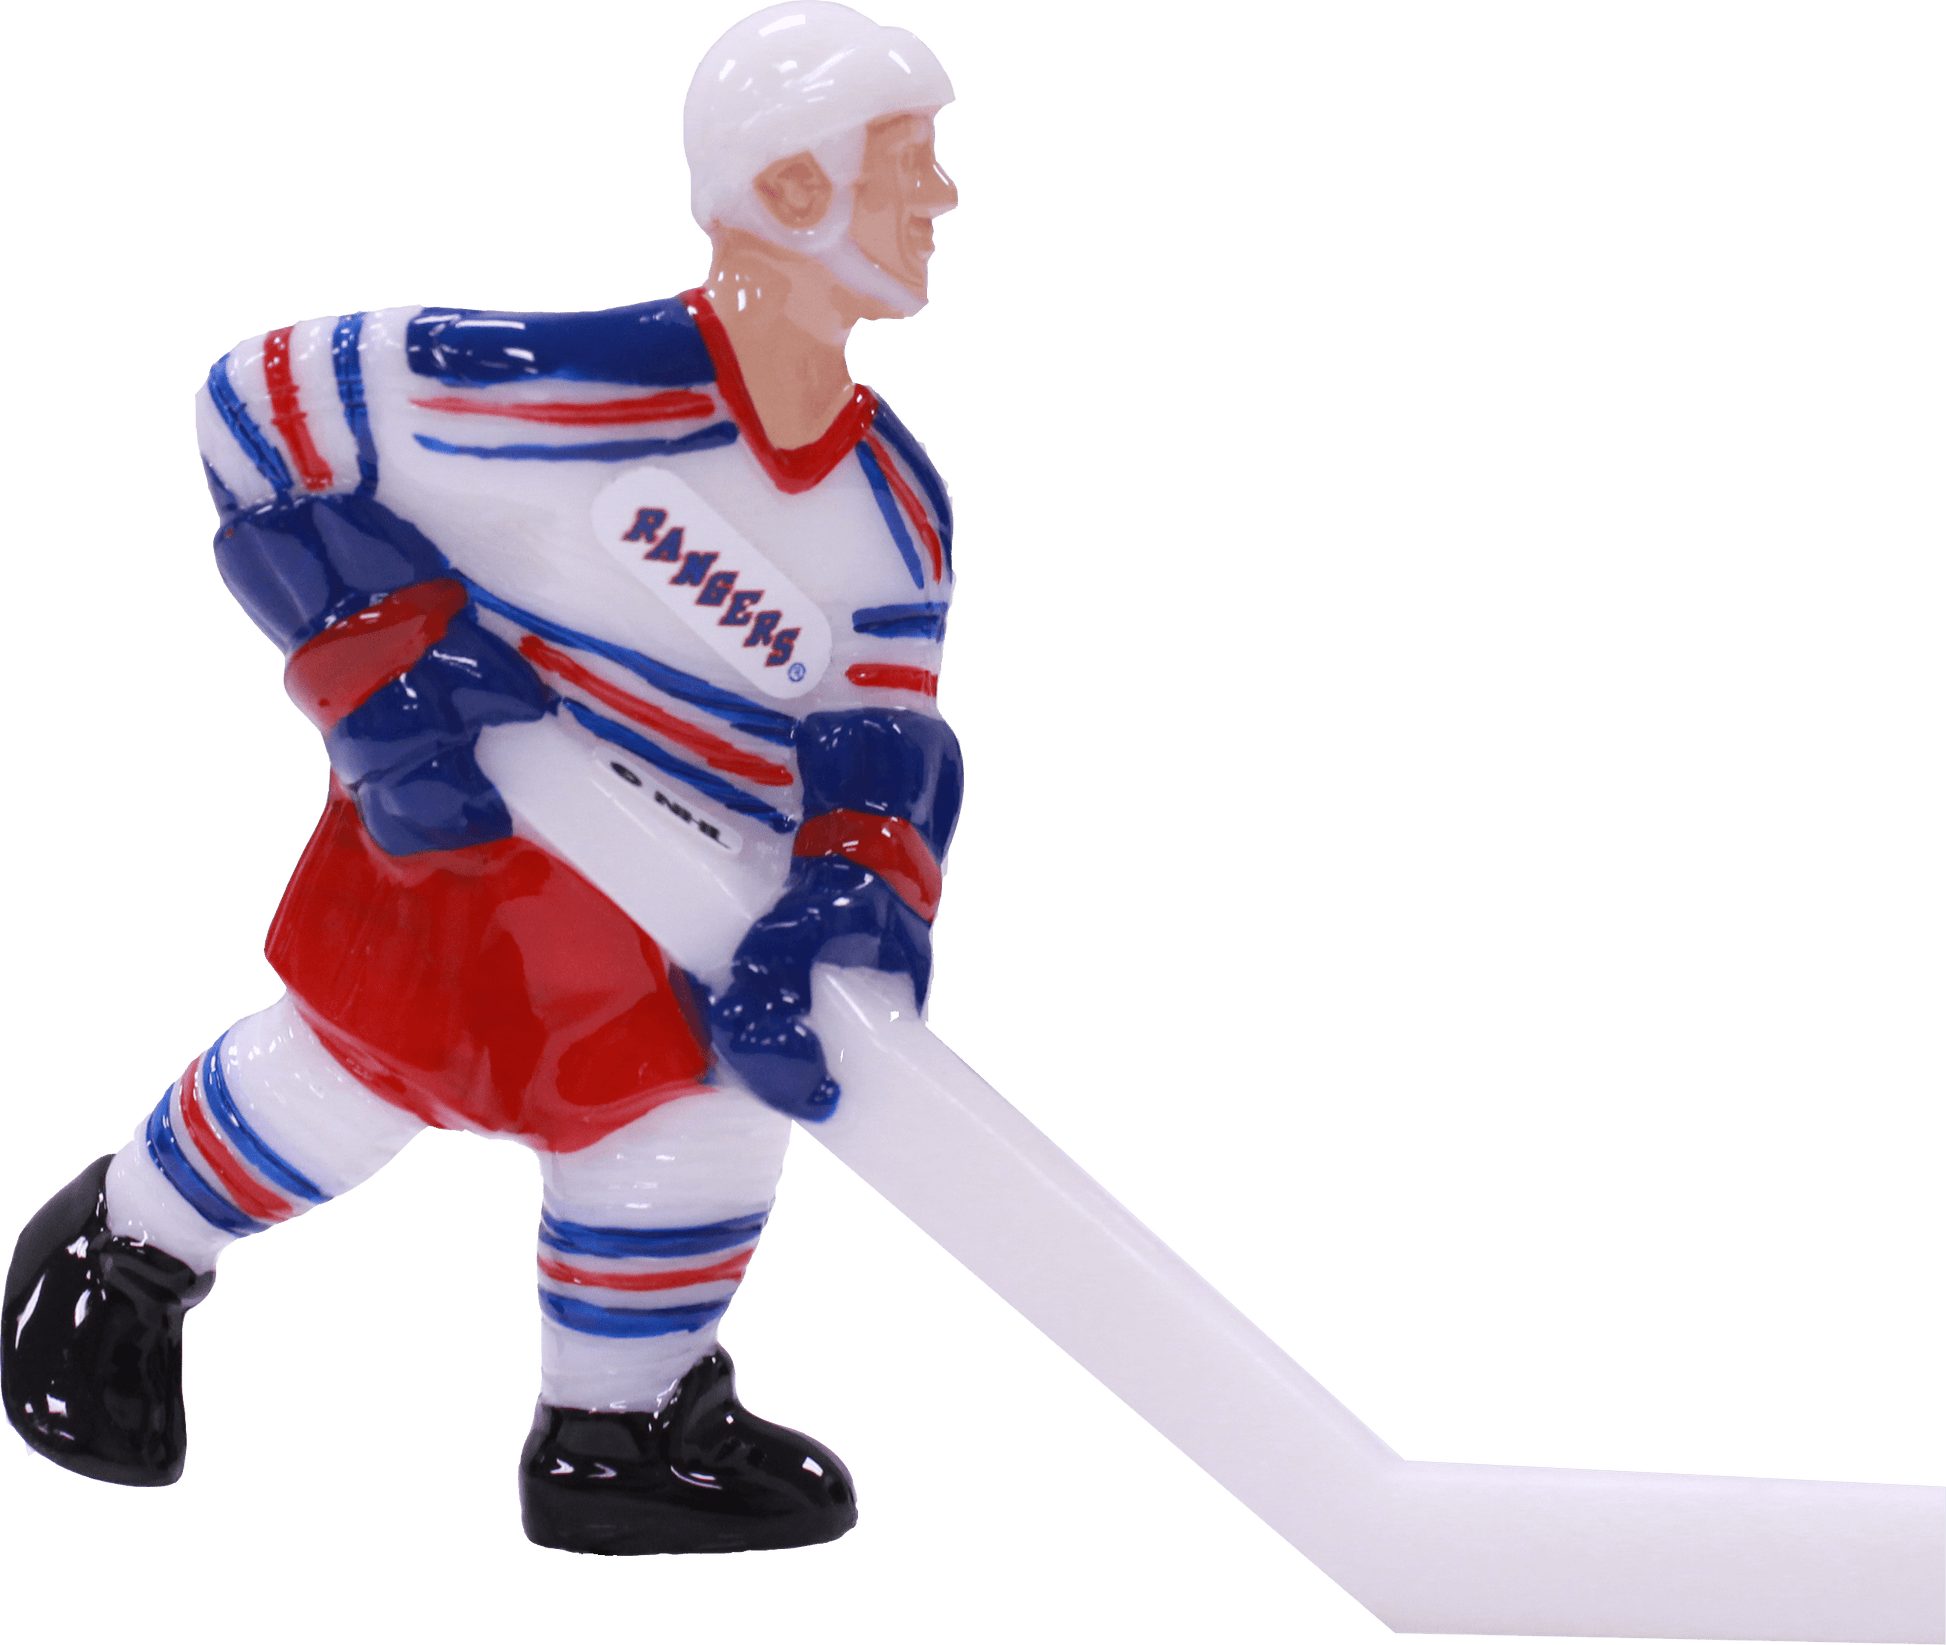 PICK HOME TEAM OPTIONS_HIDDEN_PRODUCT Innovative Concepts in Entertainment, Inc. New York Rangers (White)  